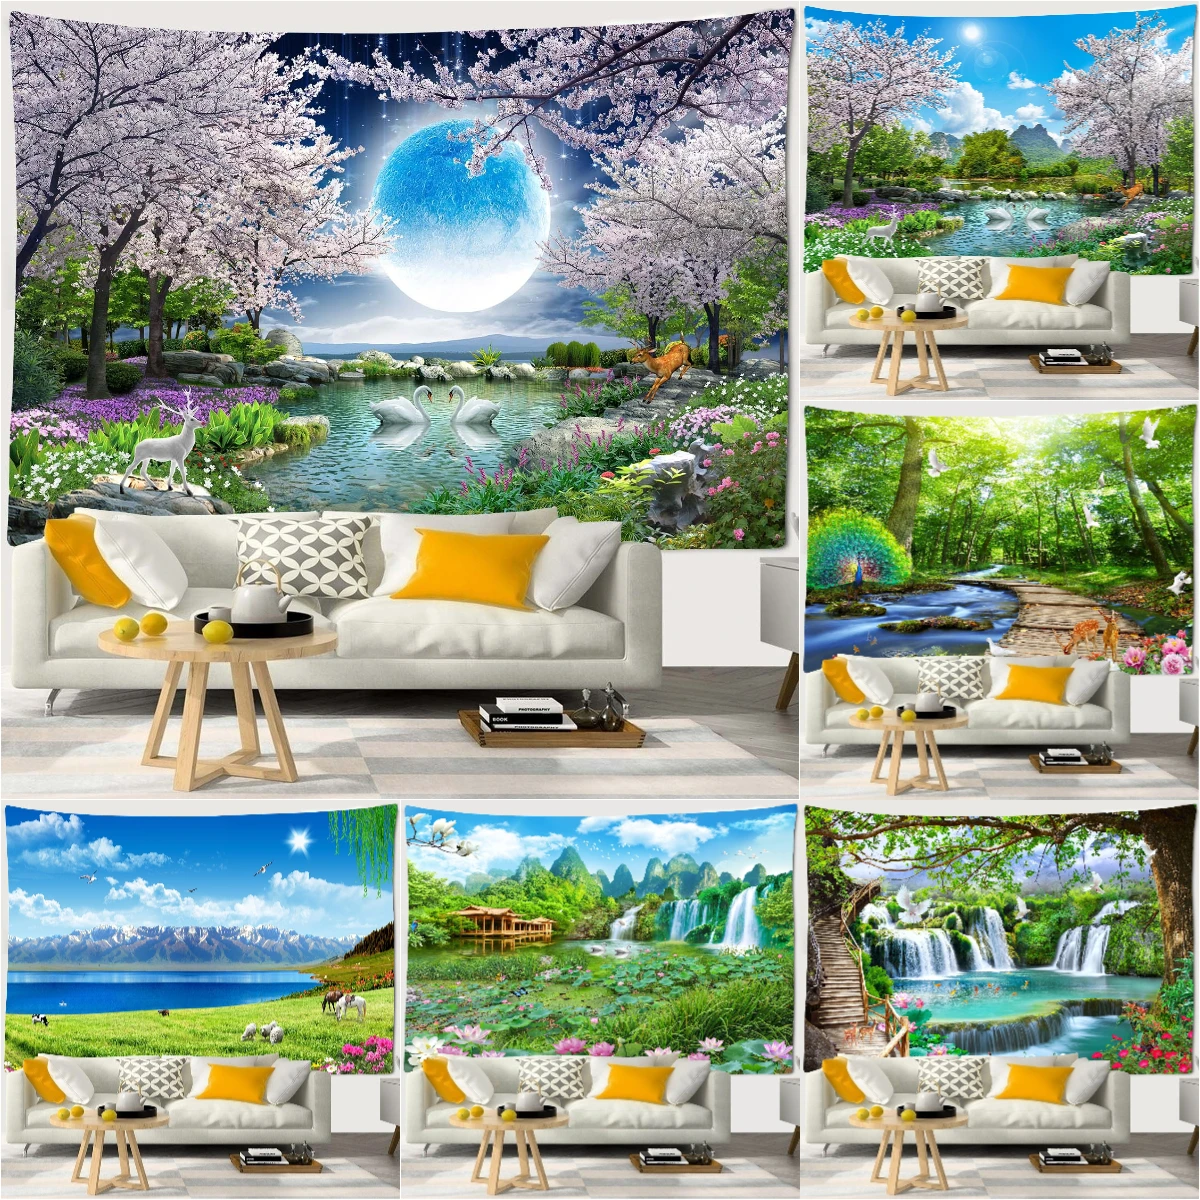 

Cherry Moon Landscpe Tapestry Beach Scenery Tapestry Wall Hanging for Bedroom Aesthetic Room Decor Boho Decoration Trippy Cloth